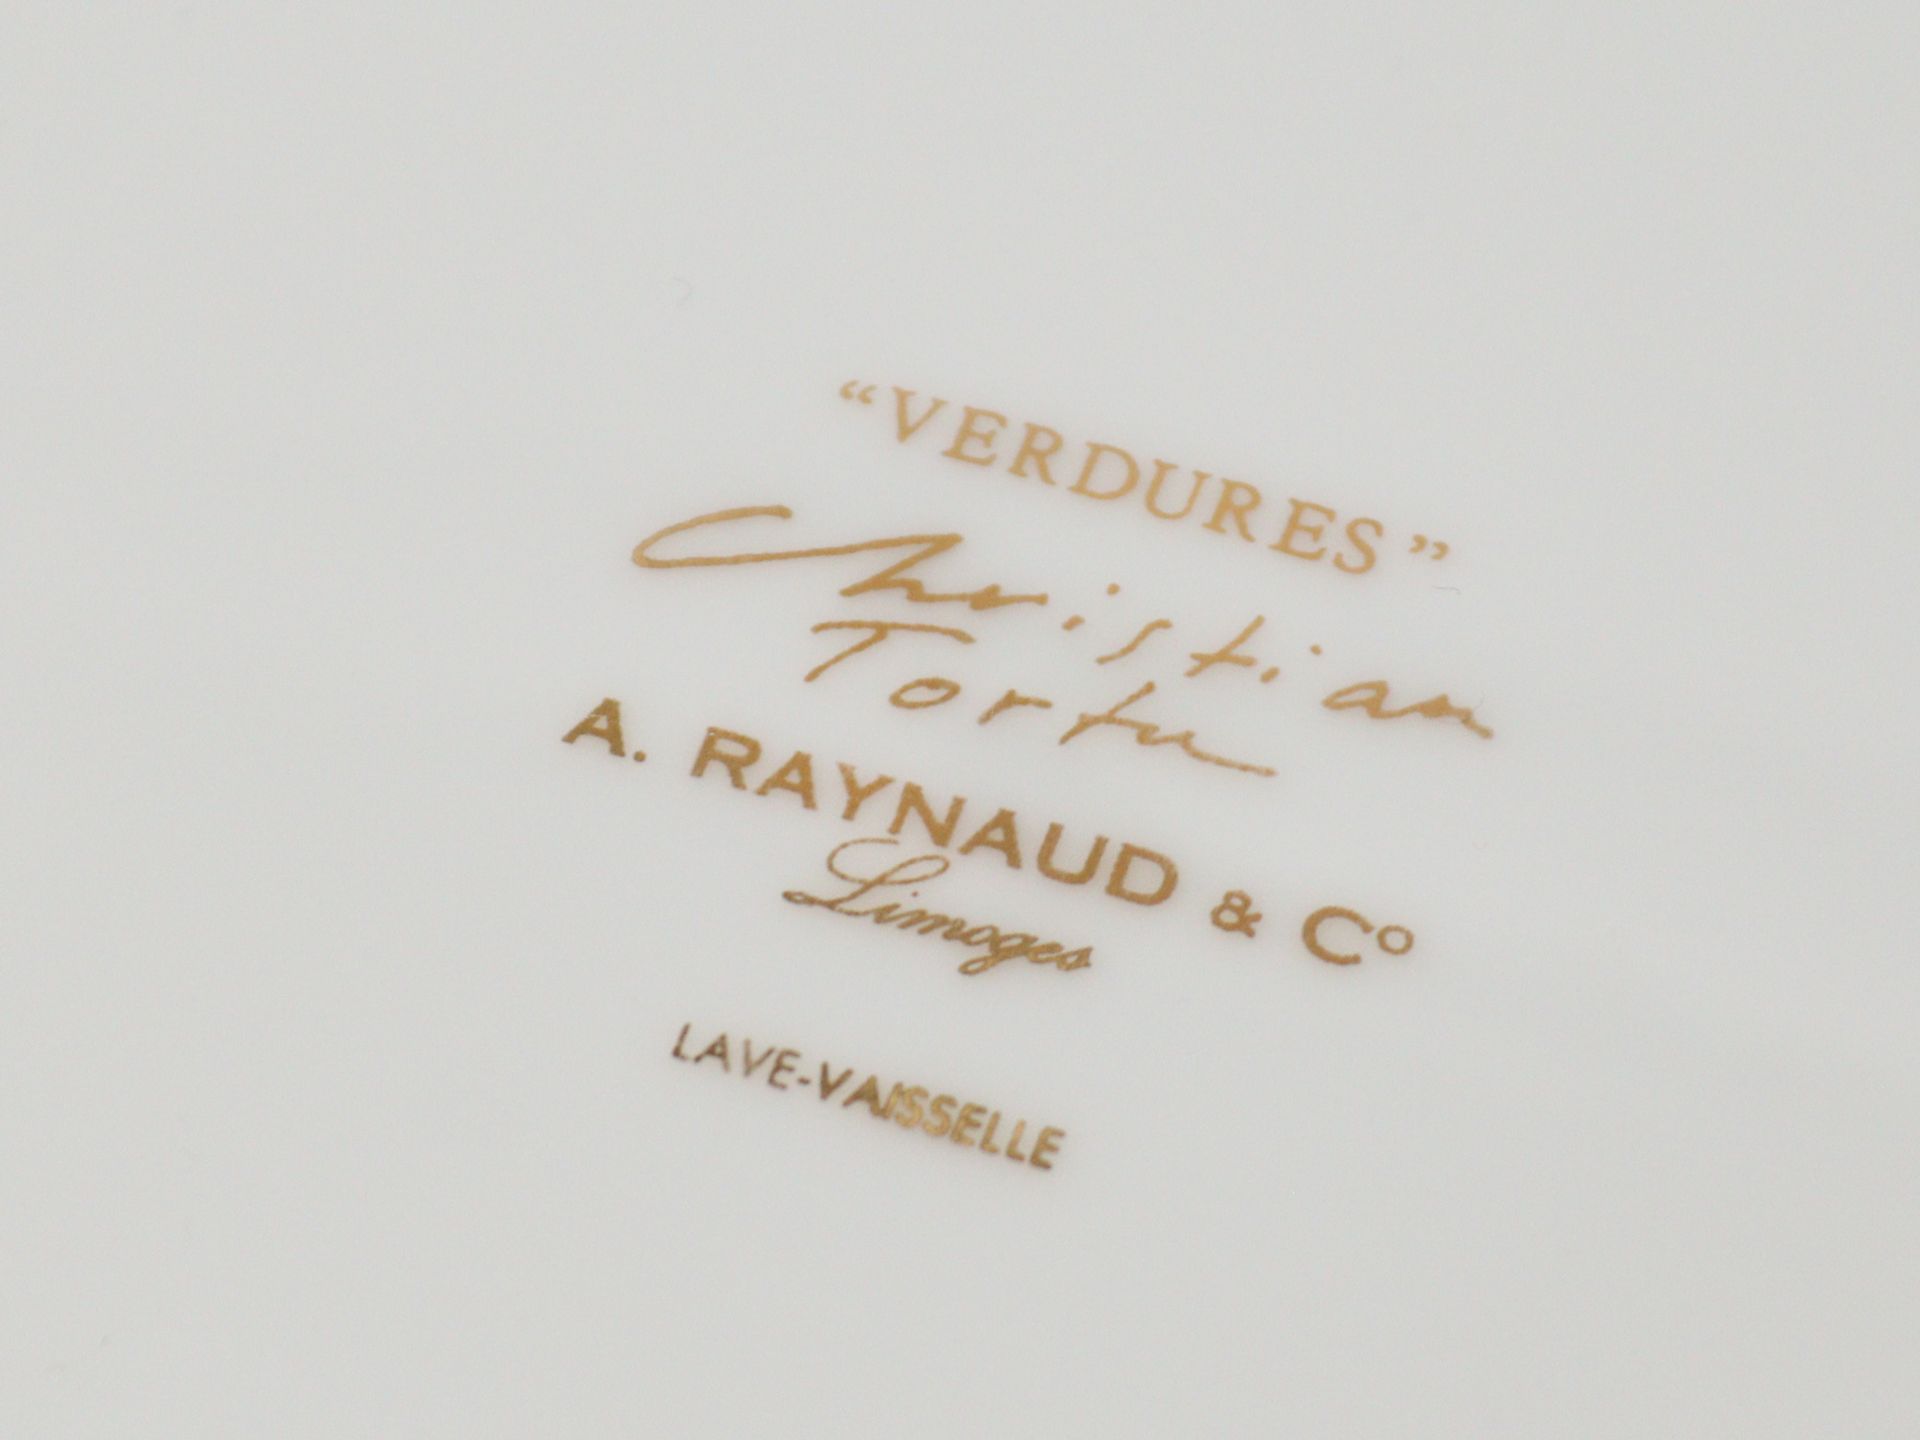 A. Raynaud & Co - Teller - Image 7 of 7